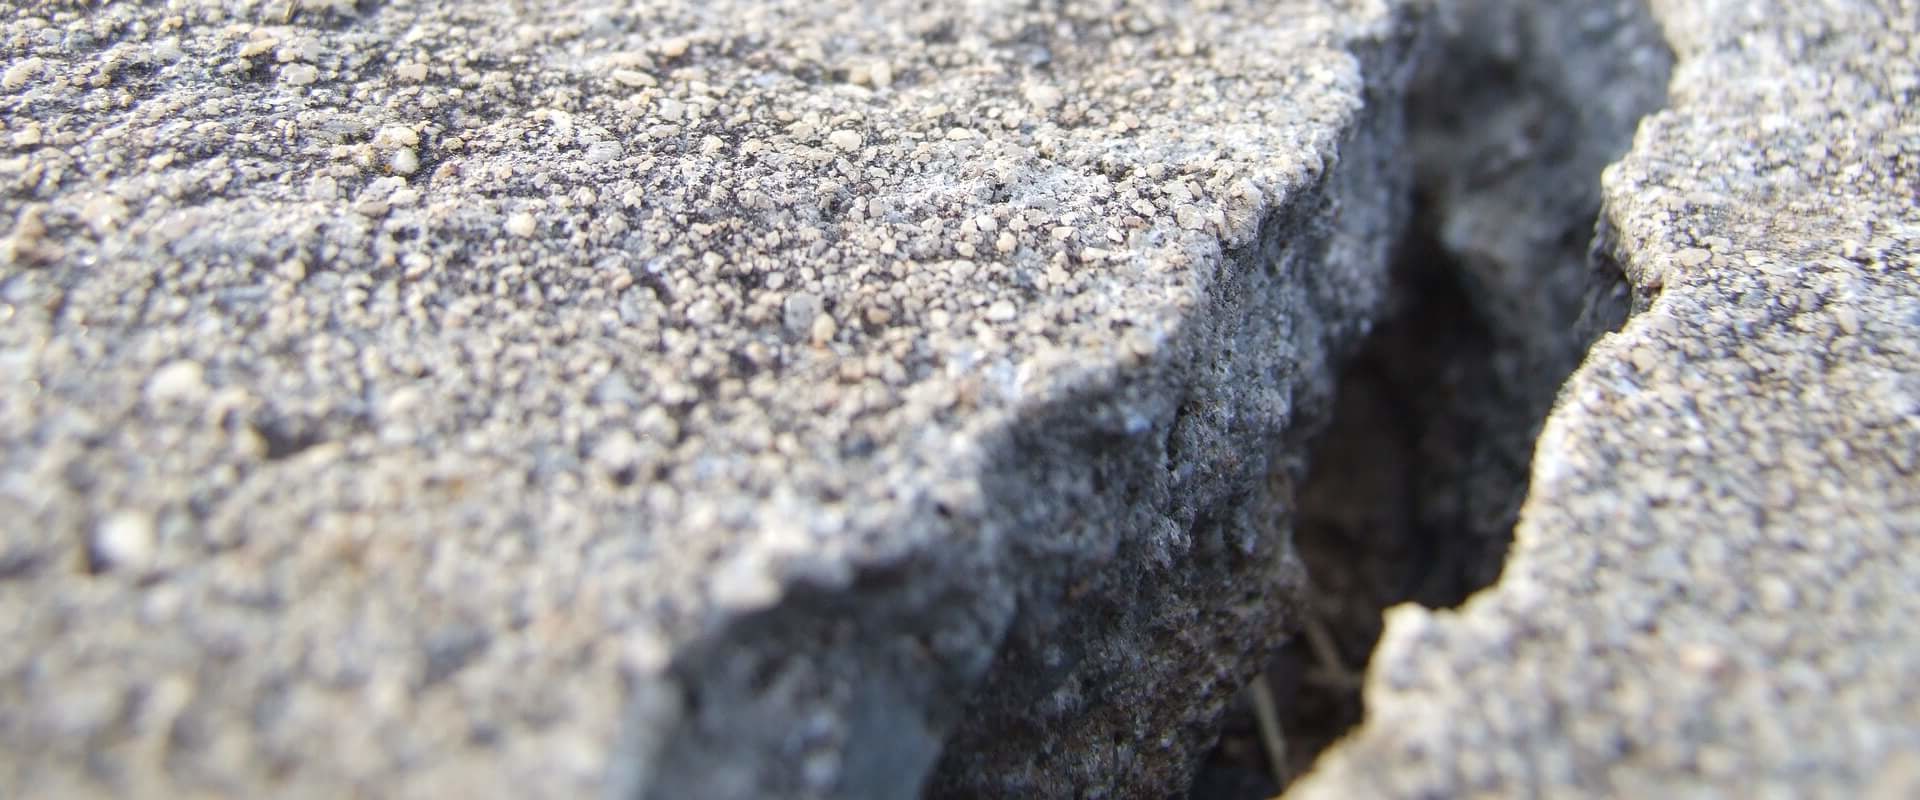 How do you stop concrete from cracking?